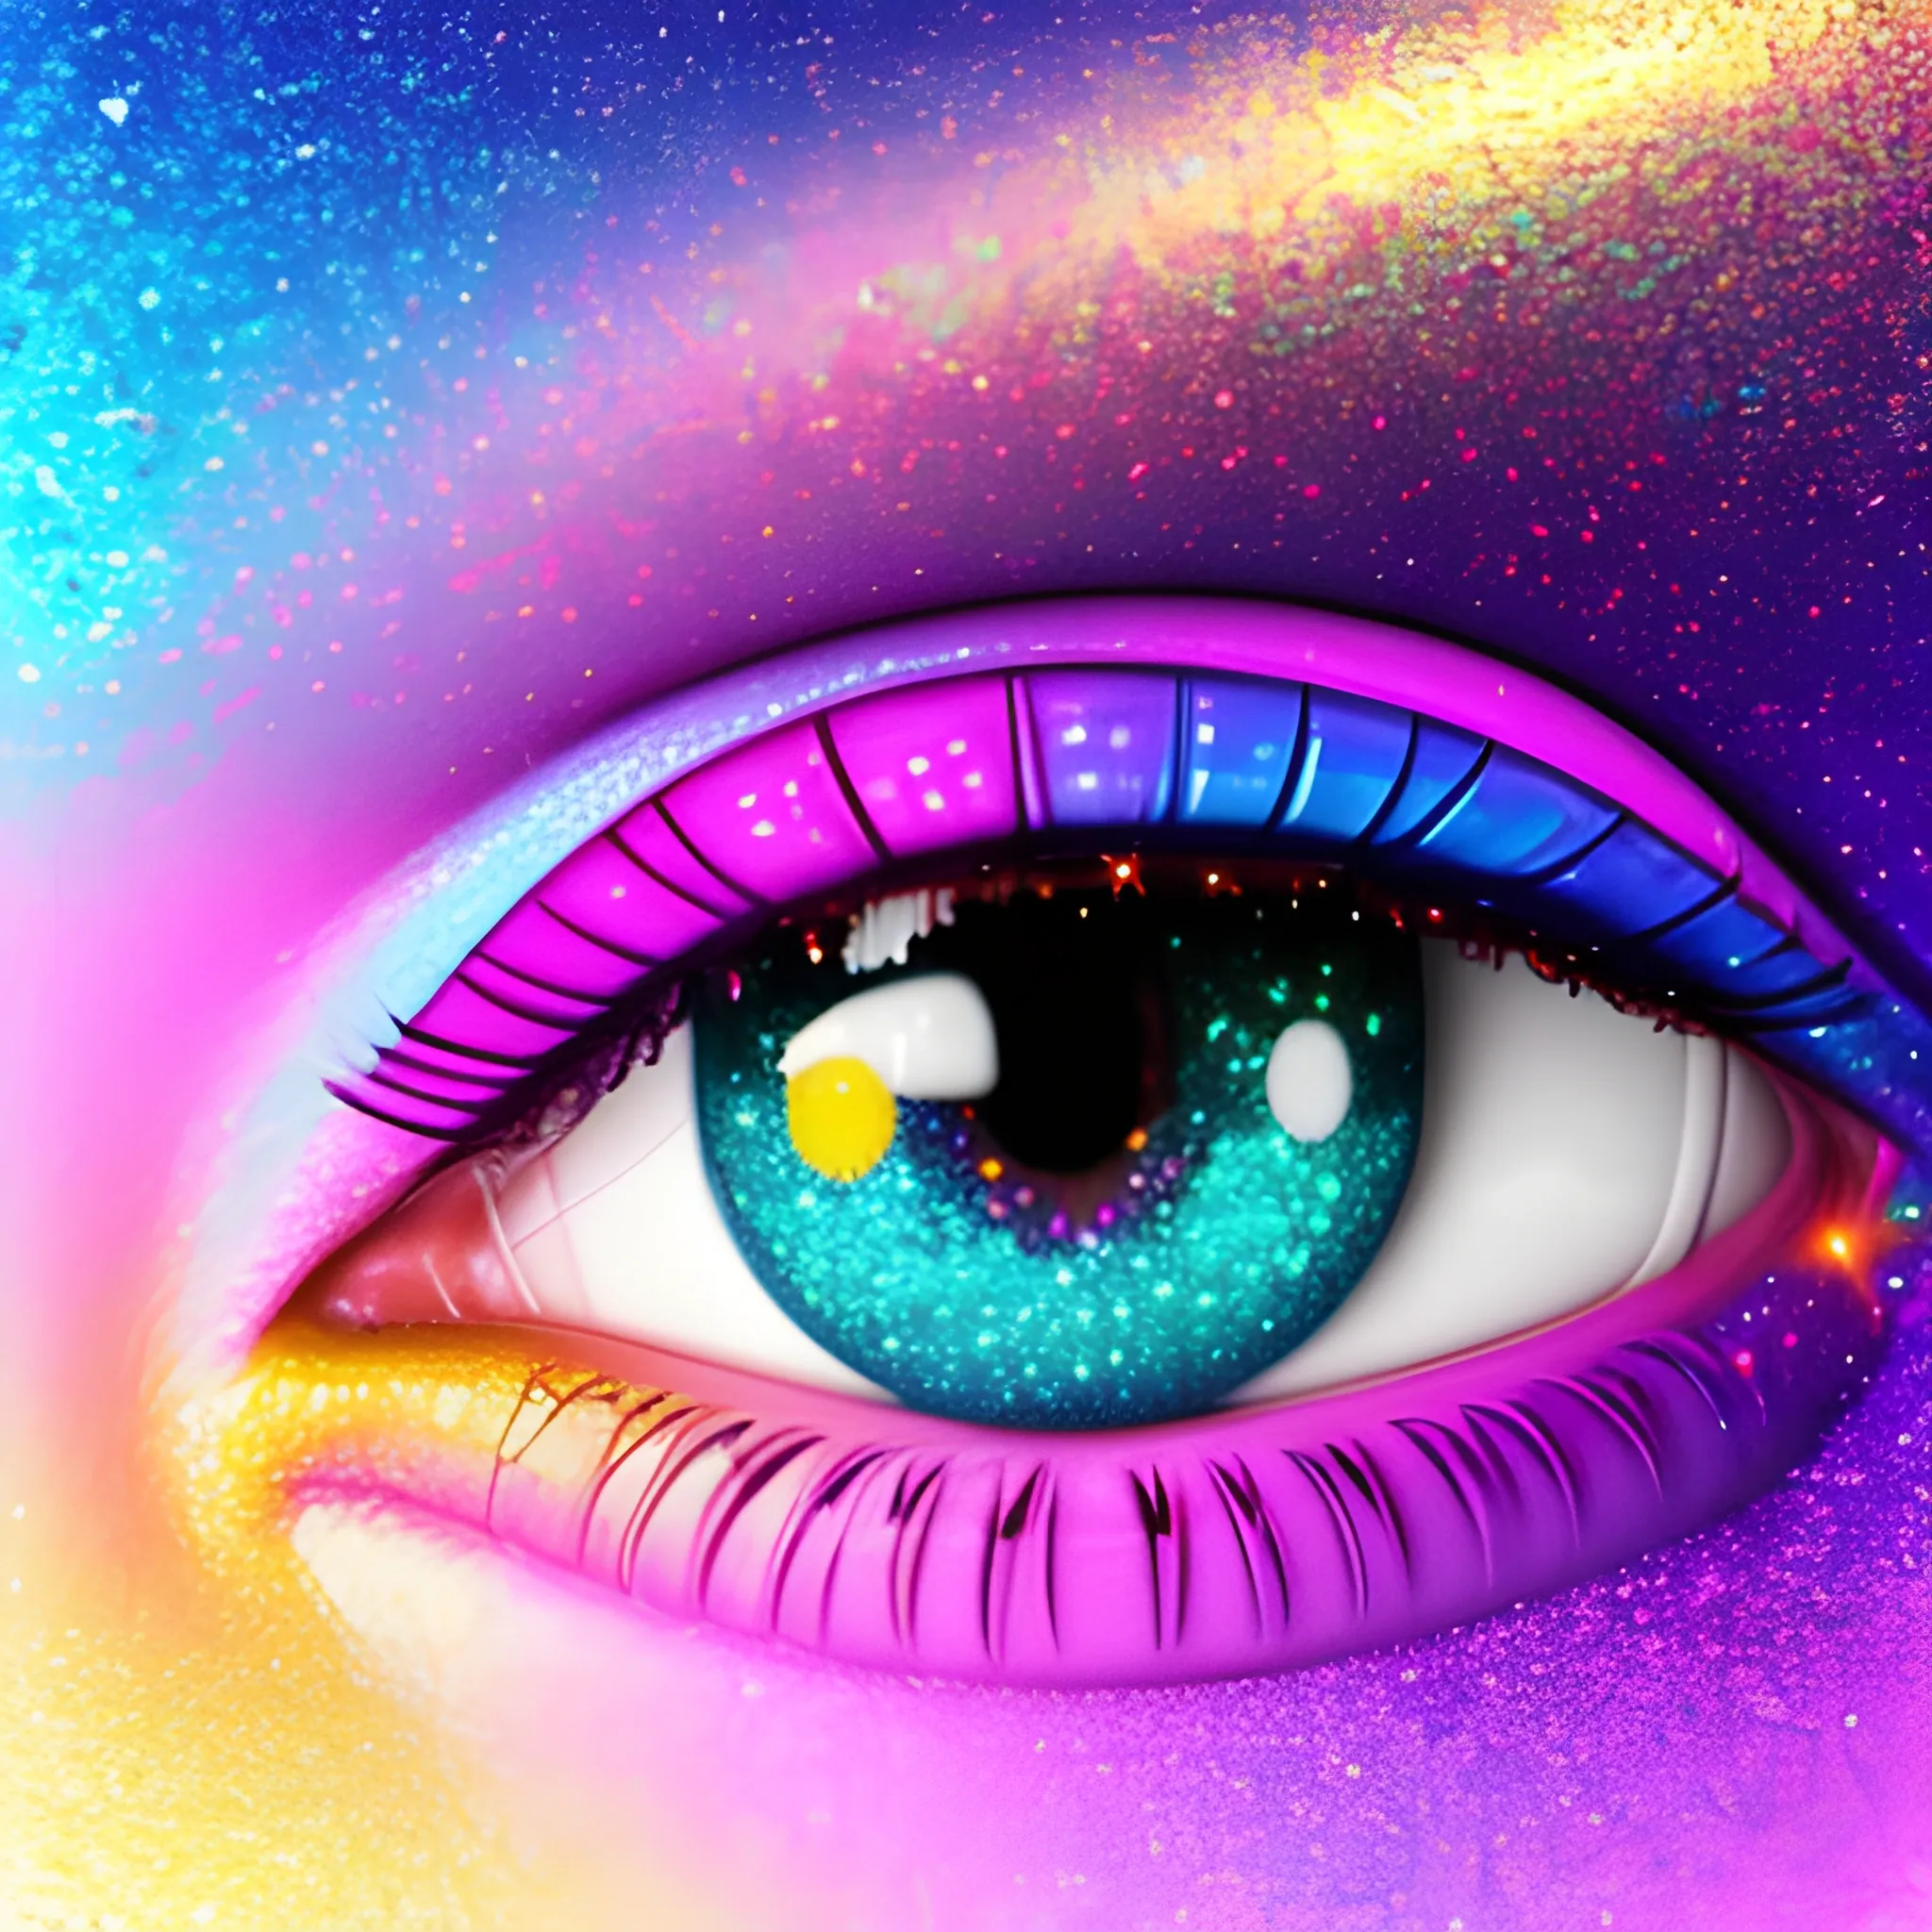 “Colorful image, eyes, glitter, sparks, soft colors, futuristic ...